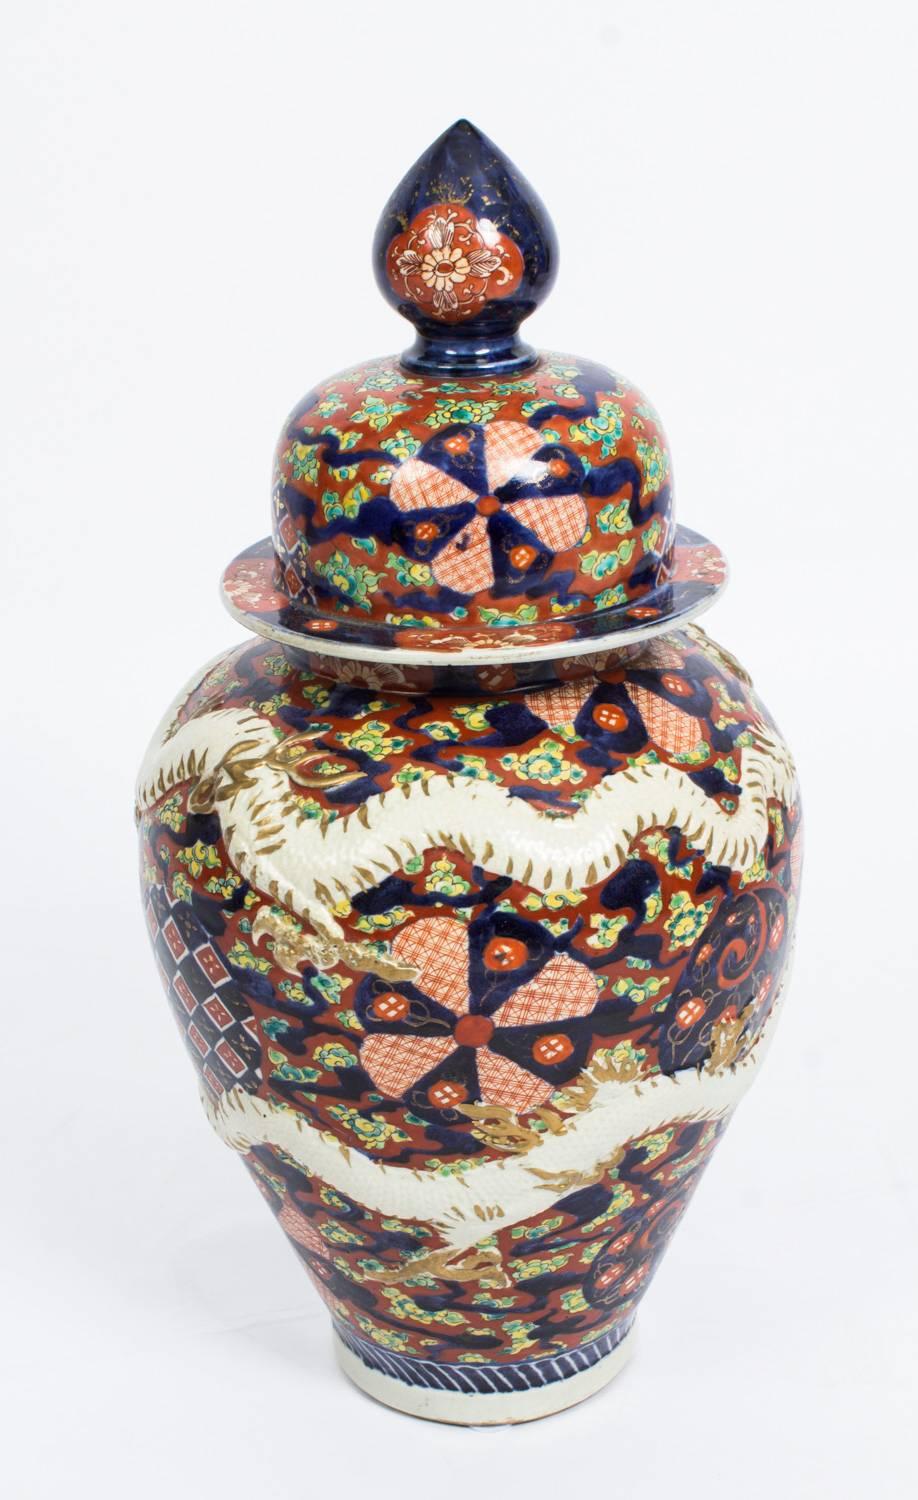 This is a lovely pair of Japanese Imari temple jars with lids, circa 1870 in date.

They feature a dense unusually decorated fan pattern design with two overlaid relief dragons to each and the traditional Imari color scheme of red, green, blue